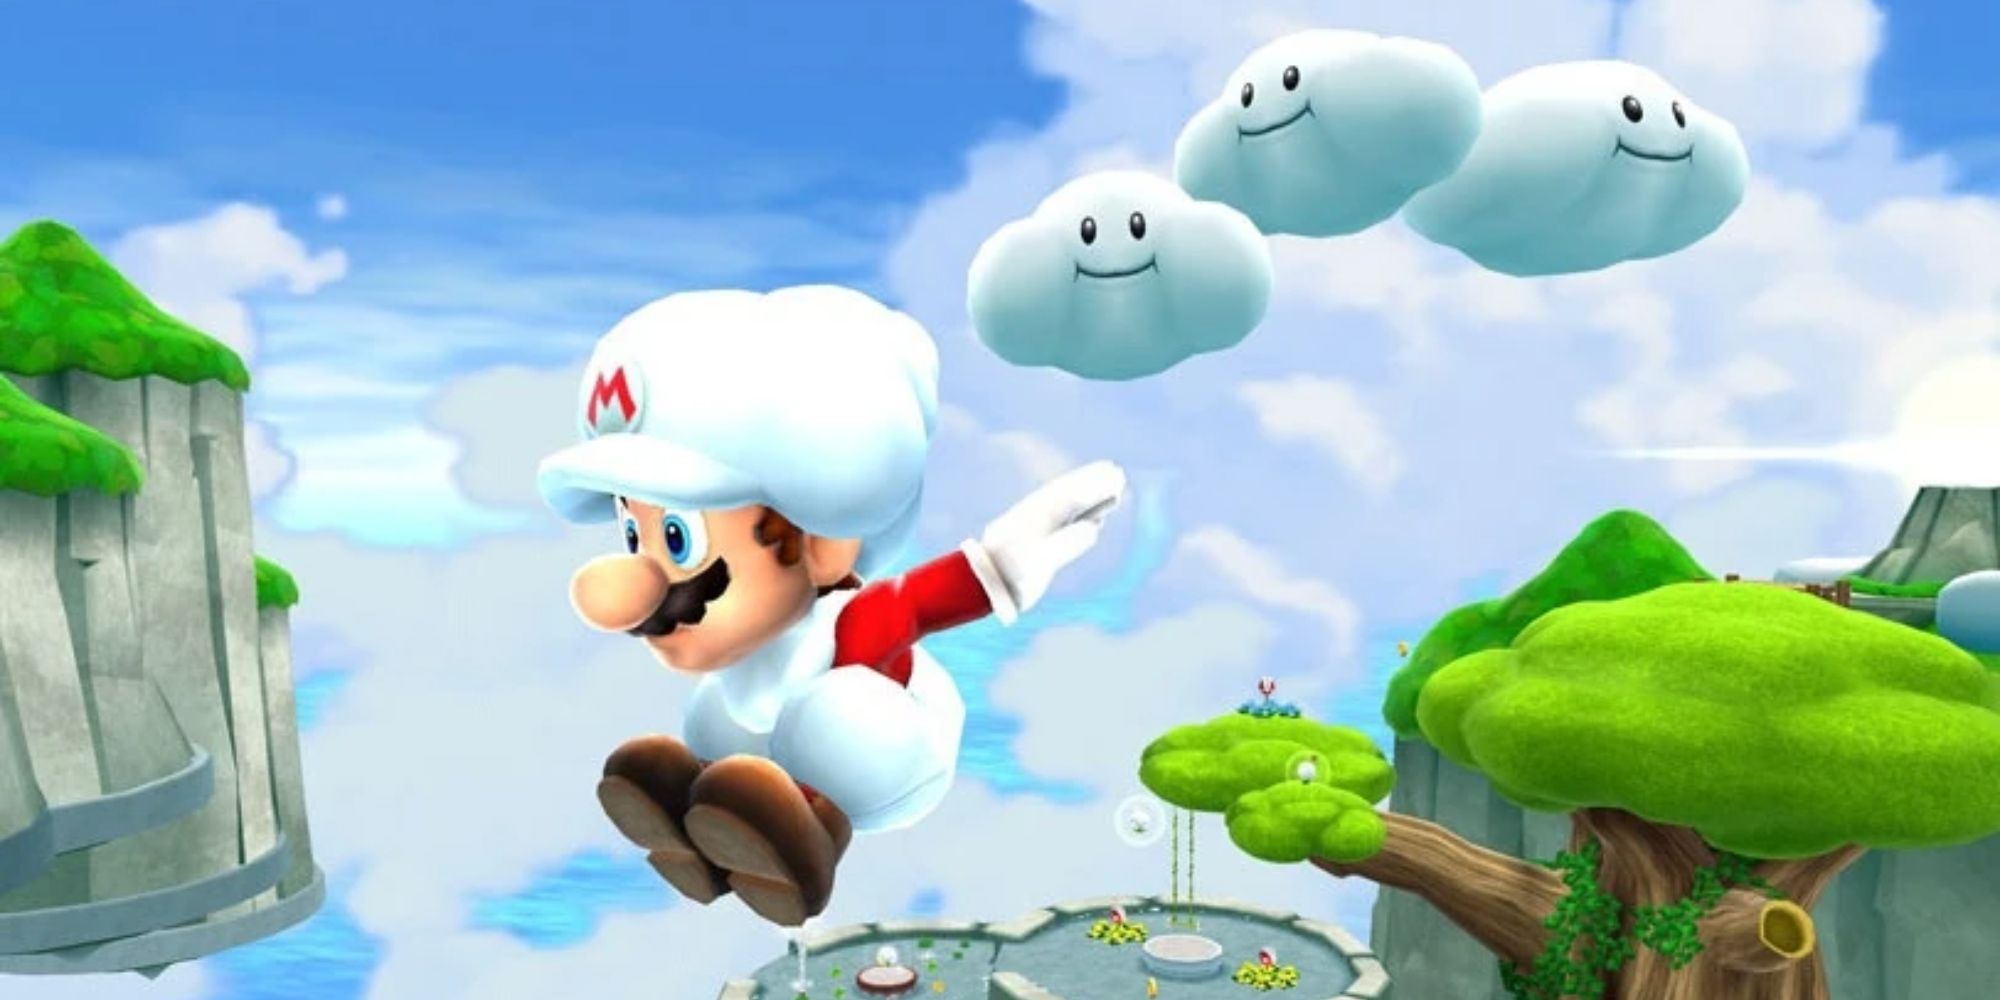 Cloud Mario leaping followed by three smiling clouds